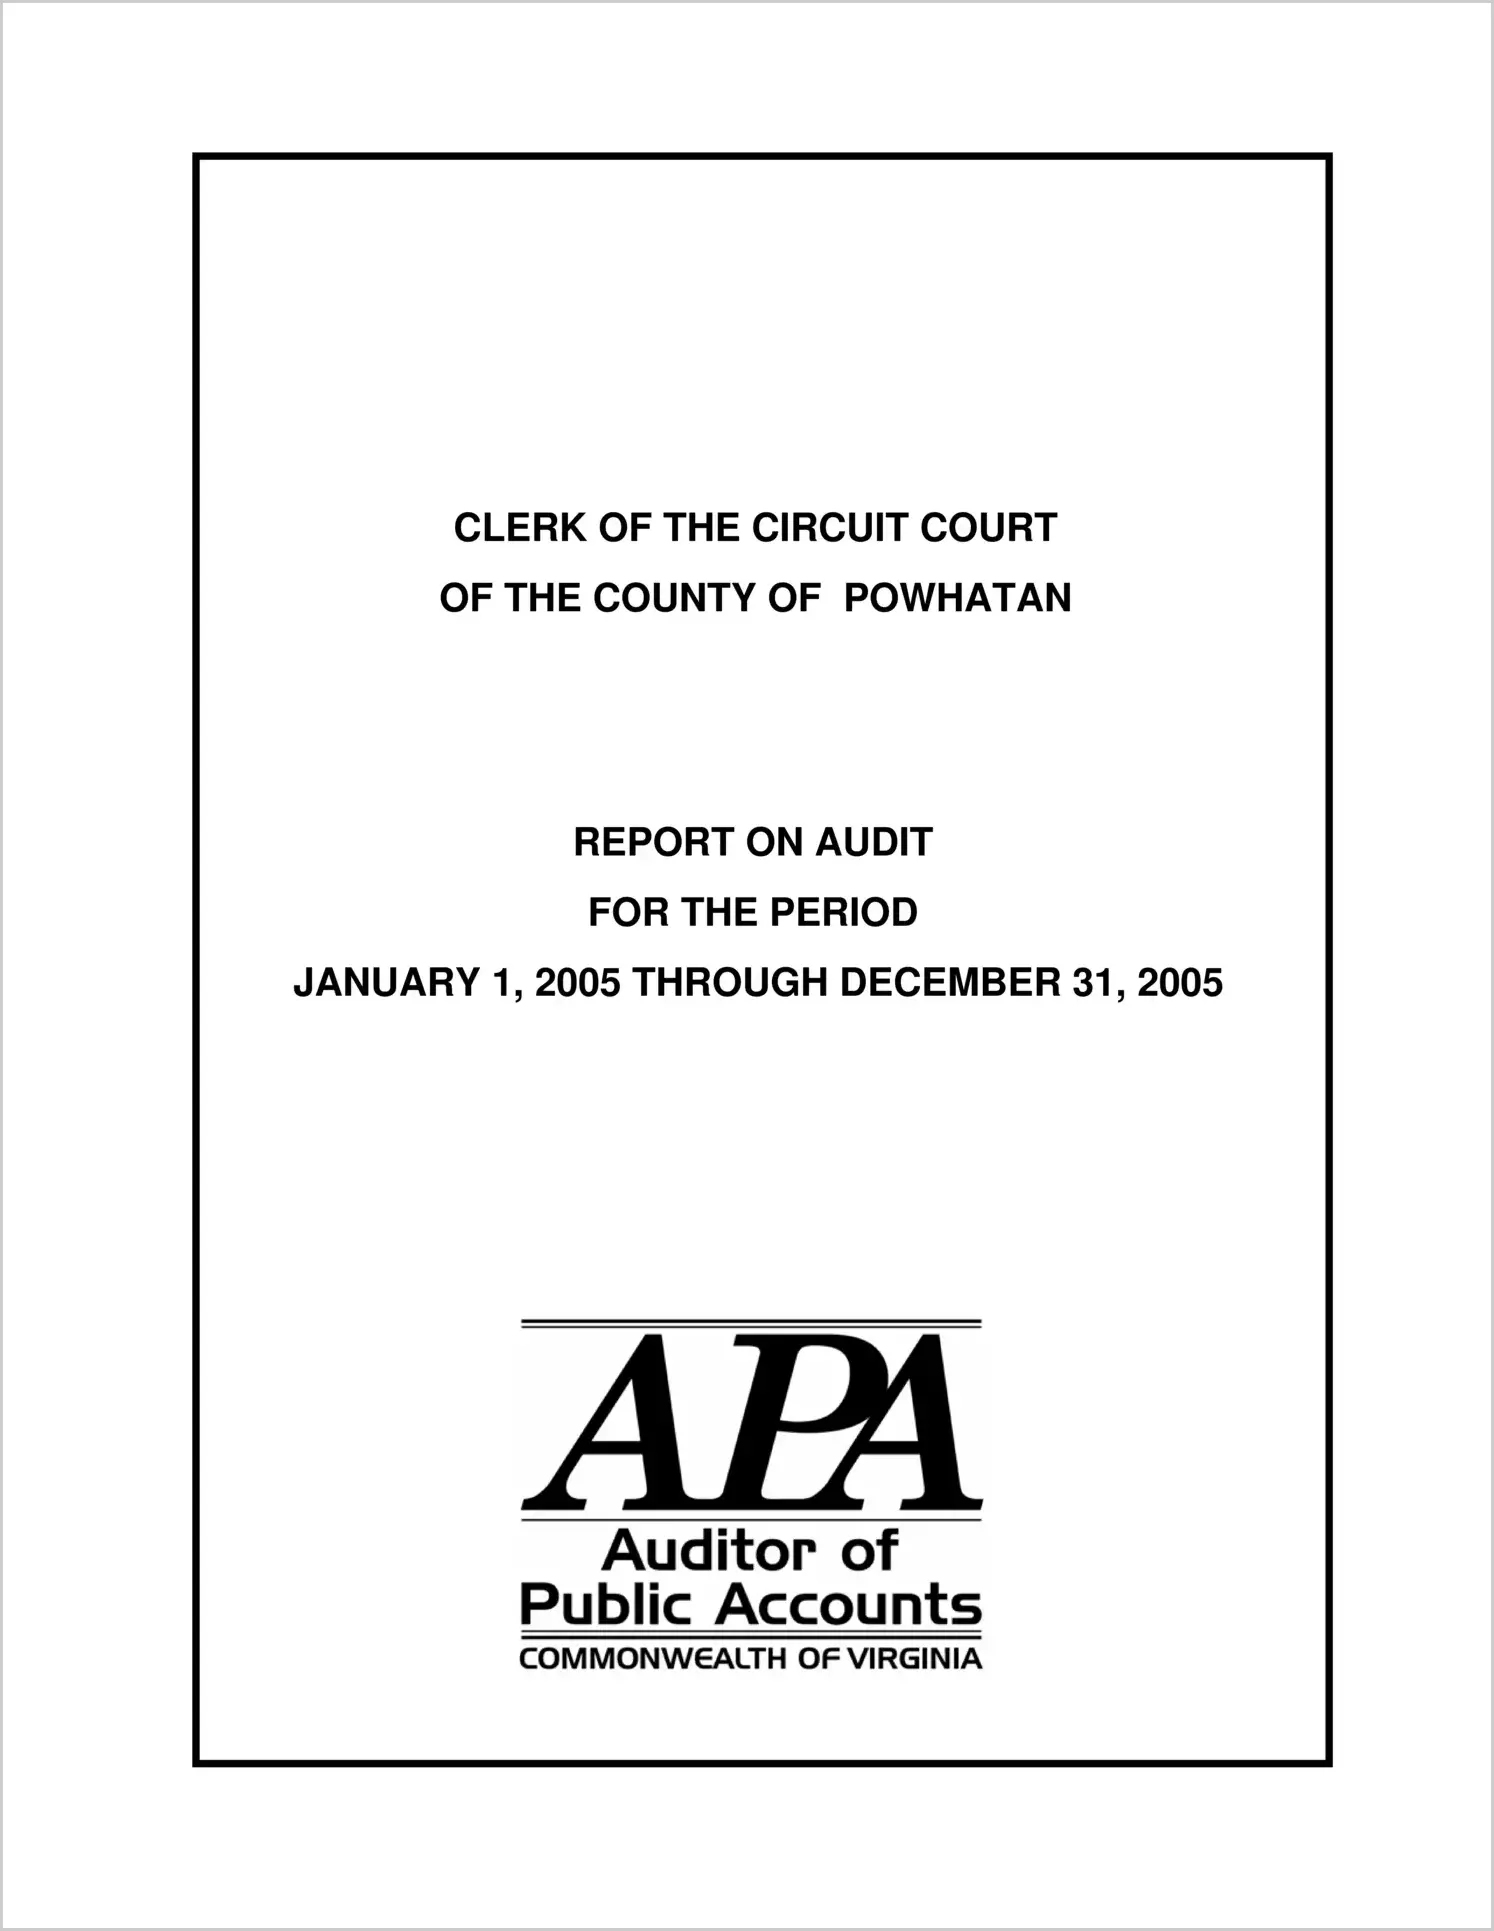 Clerk of the Circuit Court of the County of Powhatan for the period January 1, 2005 through December 31, 2005